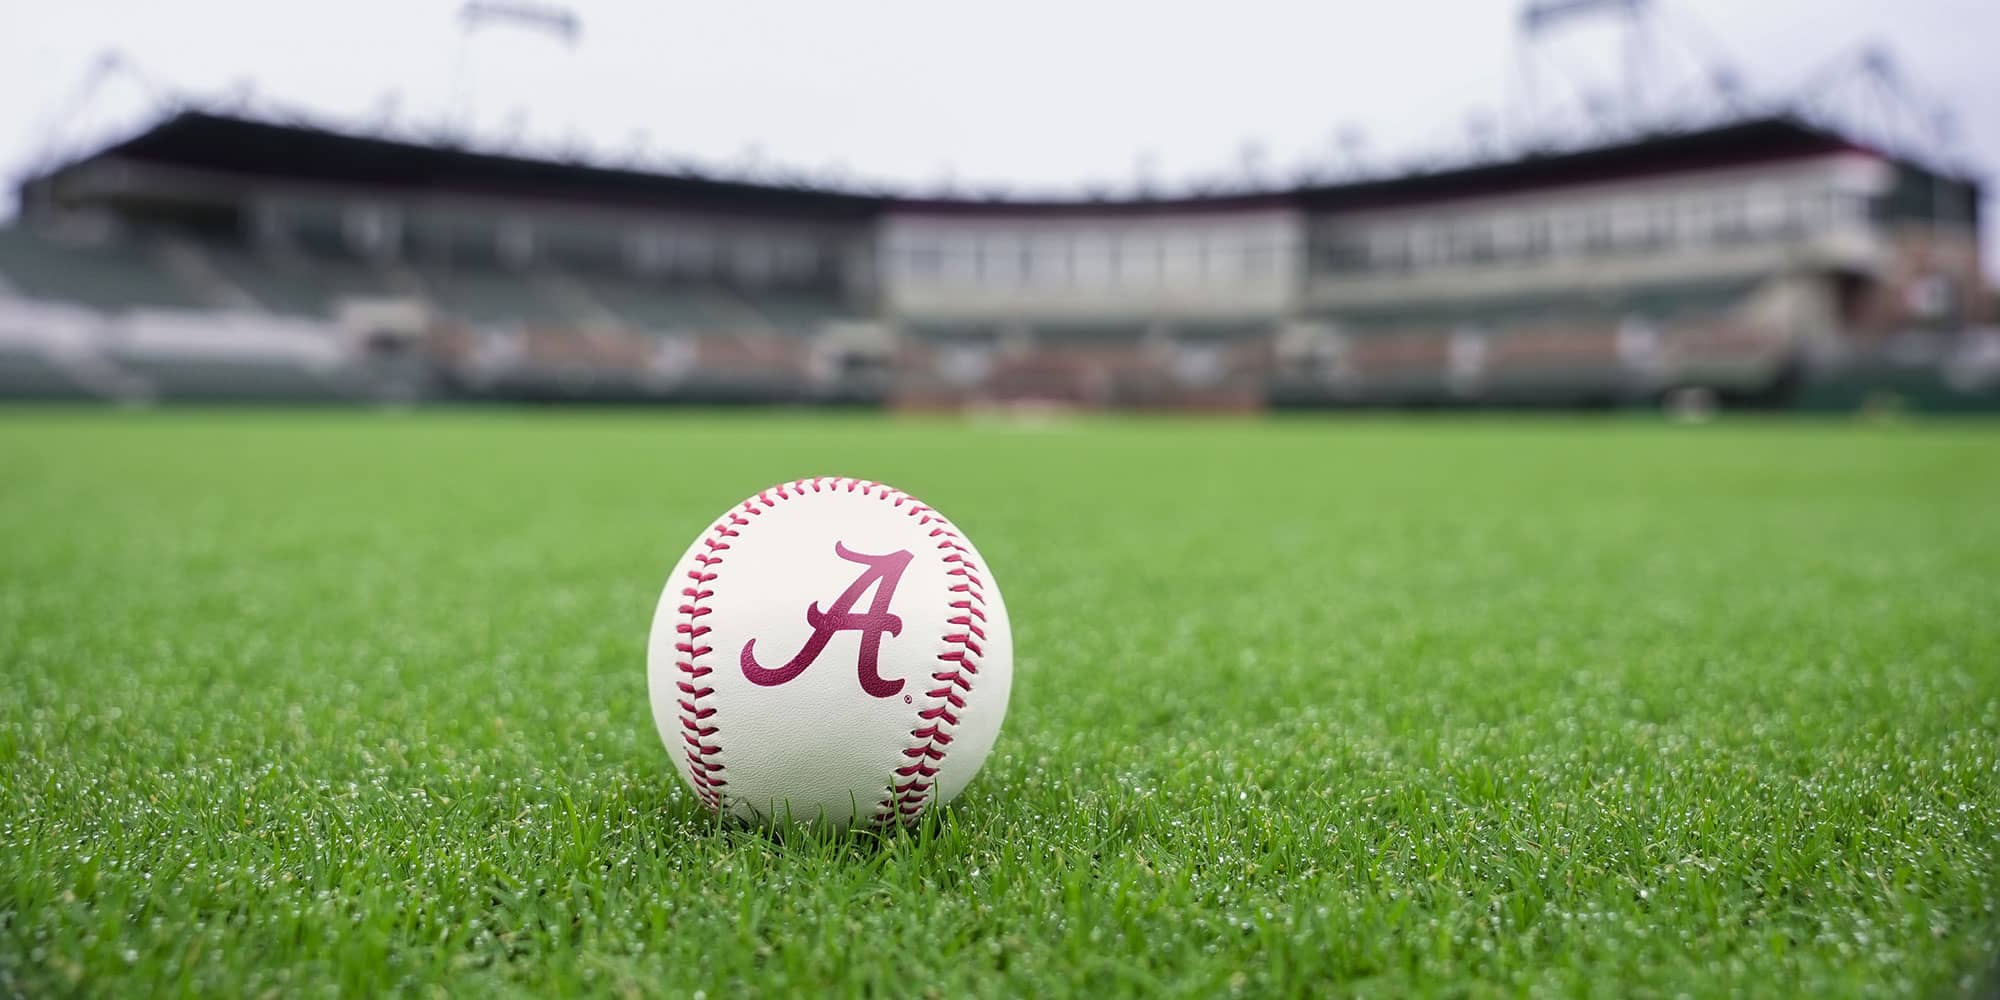 NorthBridge® Bermuda a Stand Out for the Crimson Tide’s Baseball Stadium